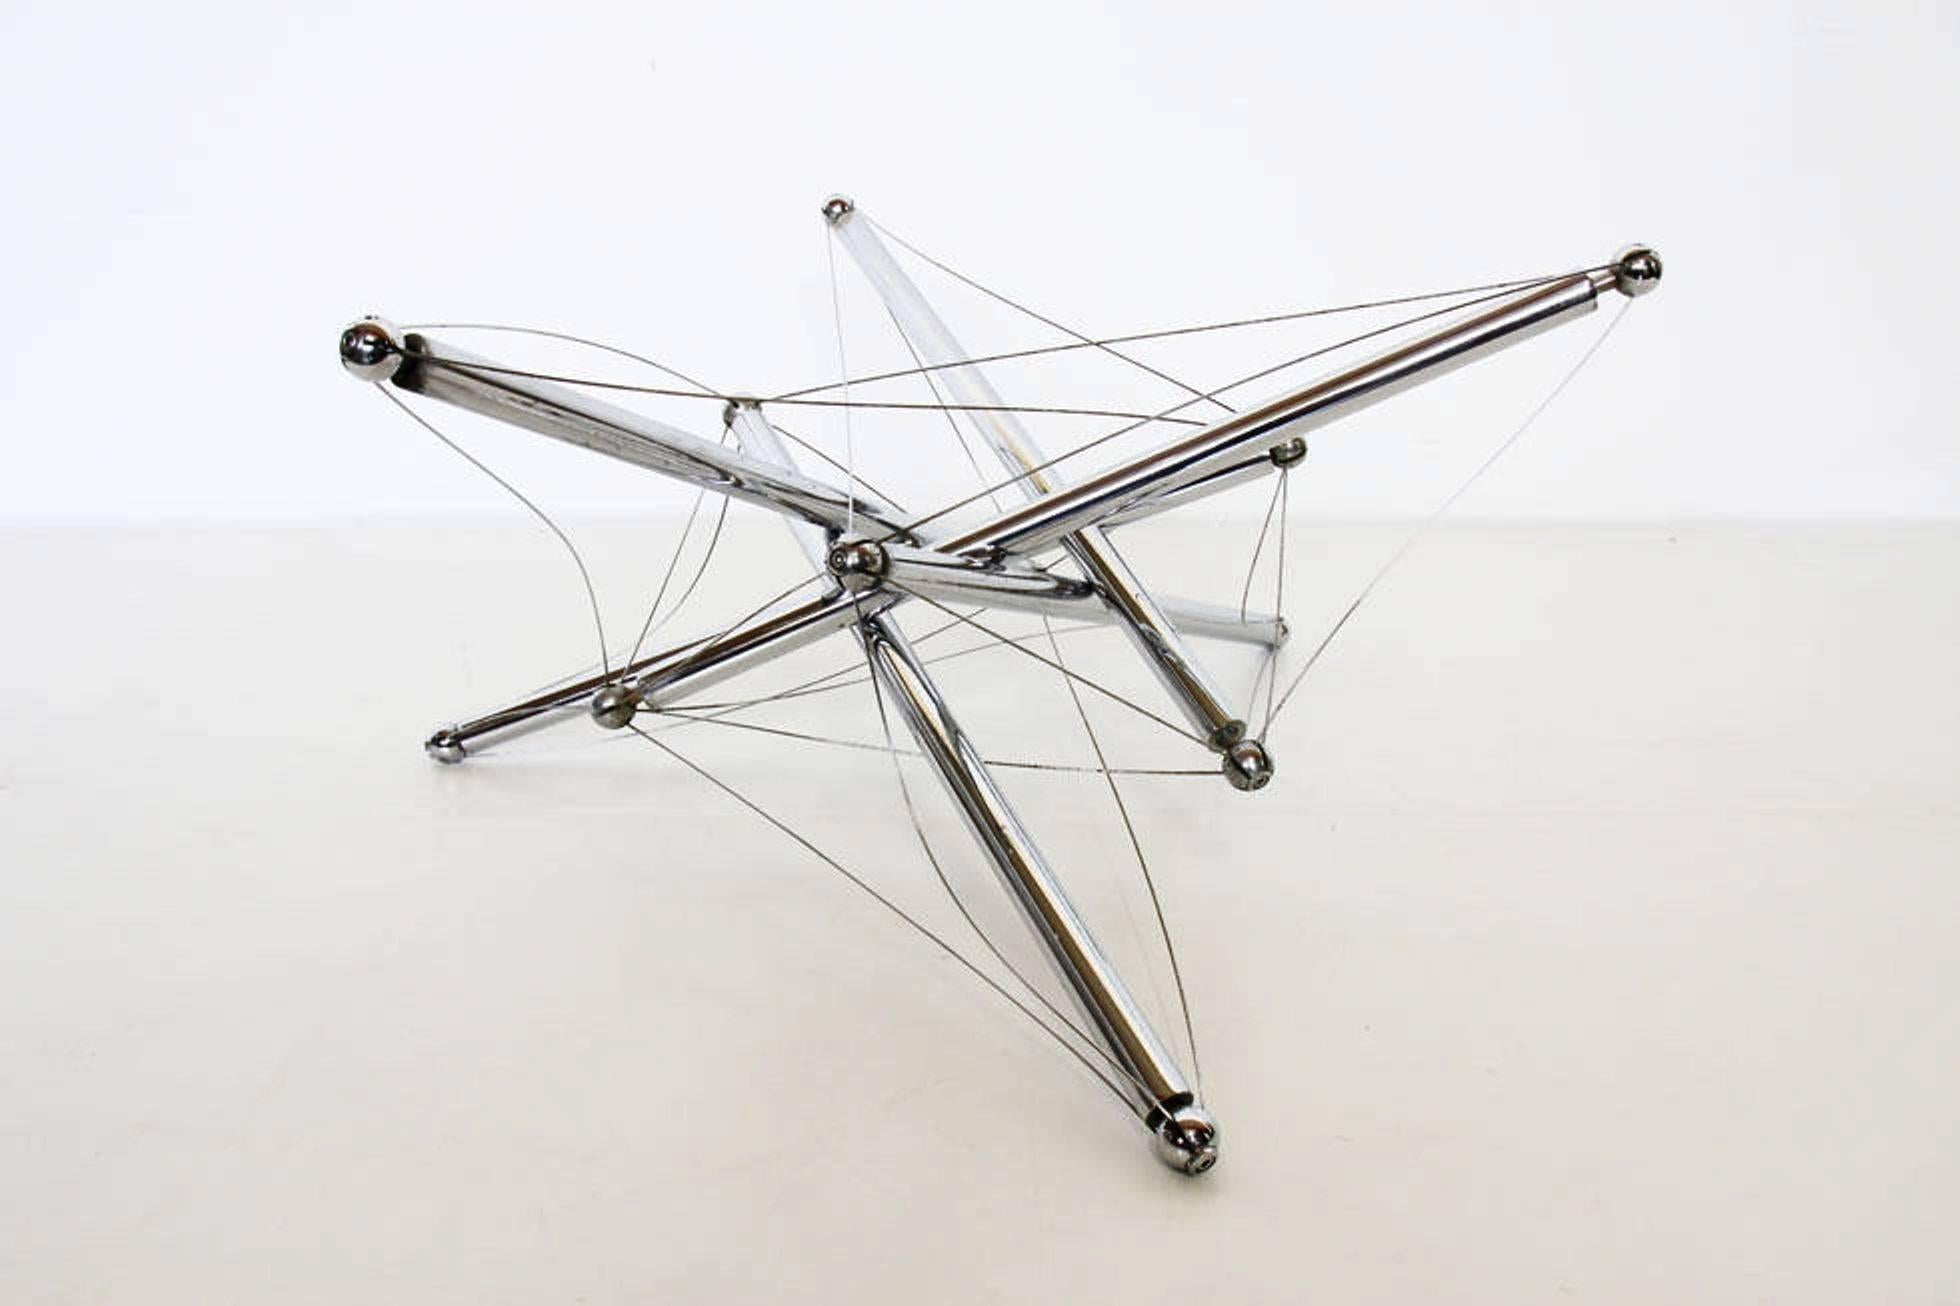 Coffee table 713 by Theodore Waddell for Cassina, 1973.
Polished chromium plated steel rods and steel tension wires. 
Glass tabletop with beveled edge under the top.
Some stains on the chromium rods.
 